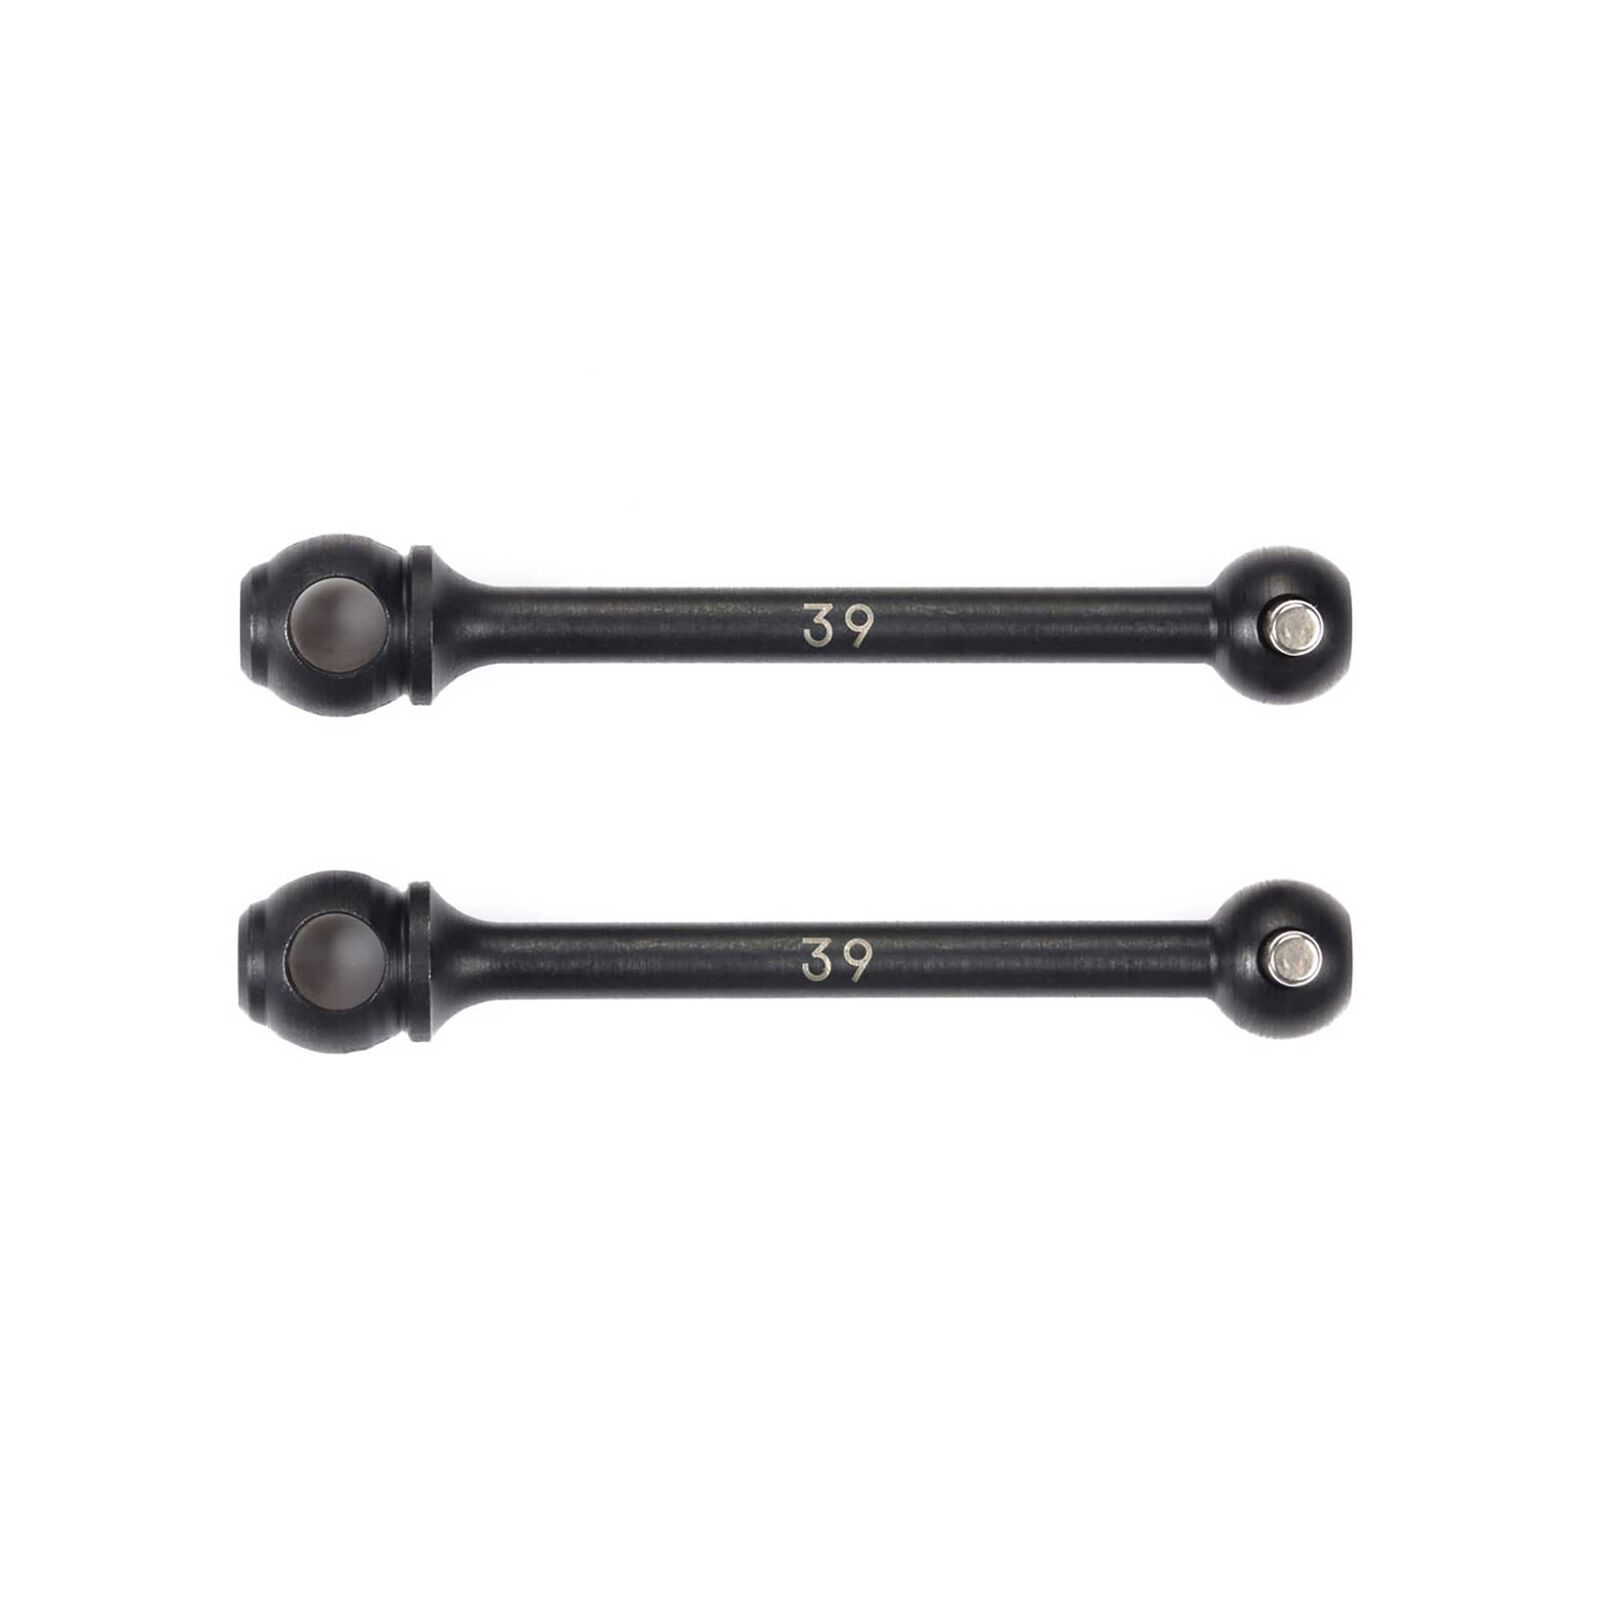 39mm Drive Shaft: Double Cardan Joint Shafts (2pc)